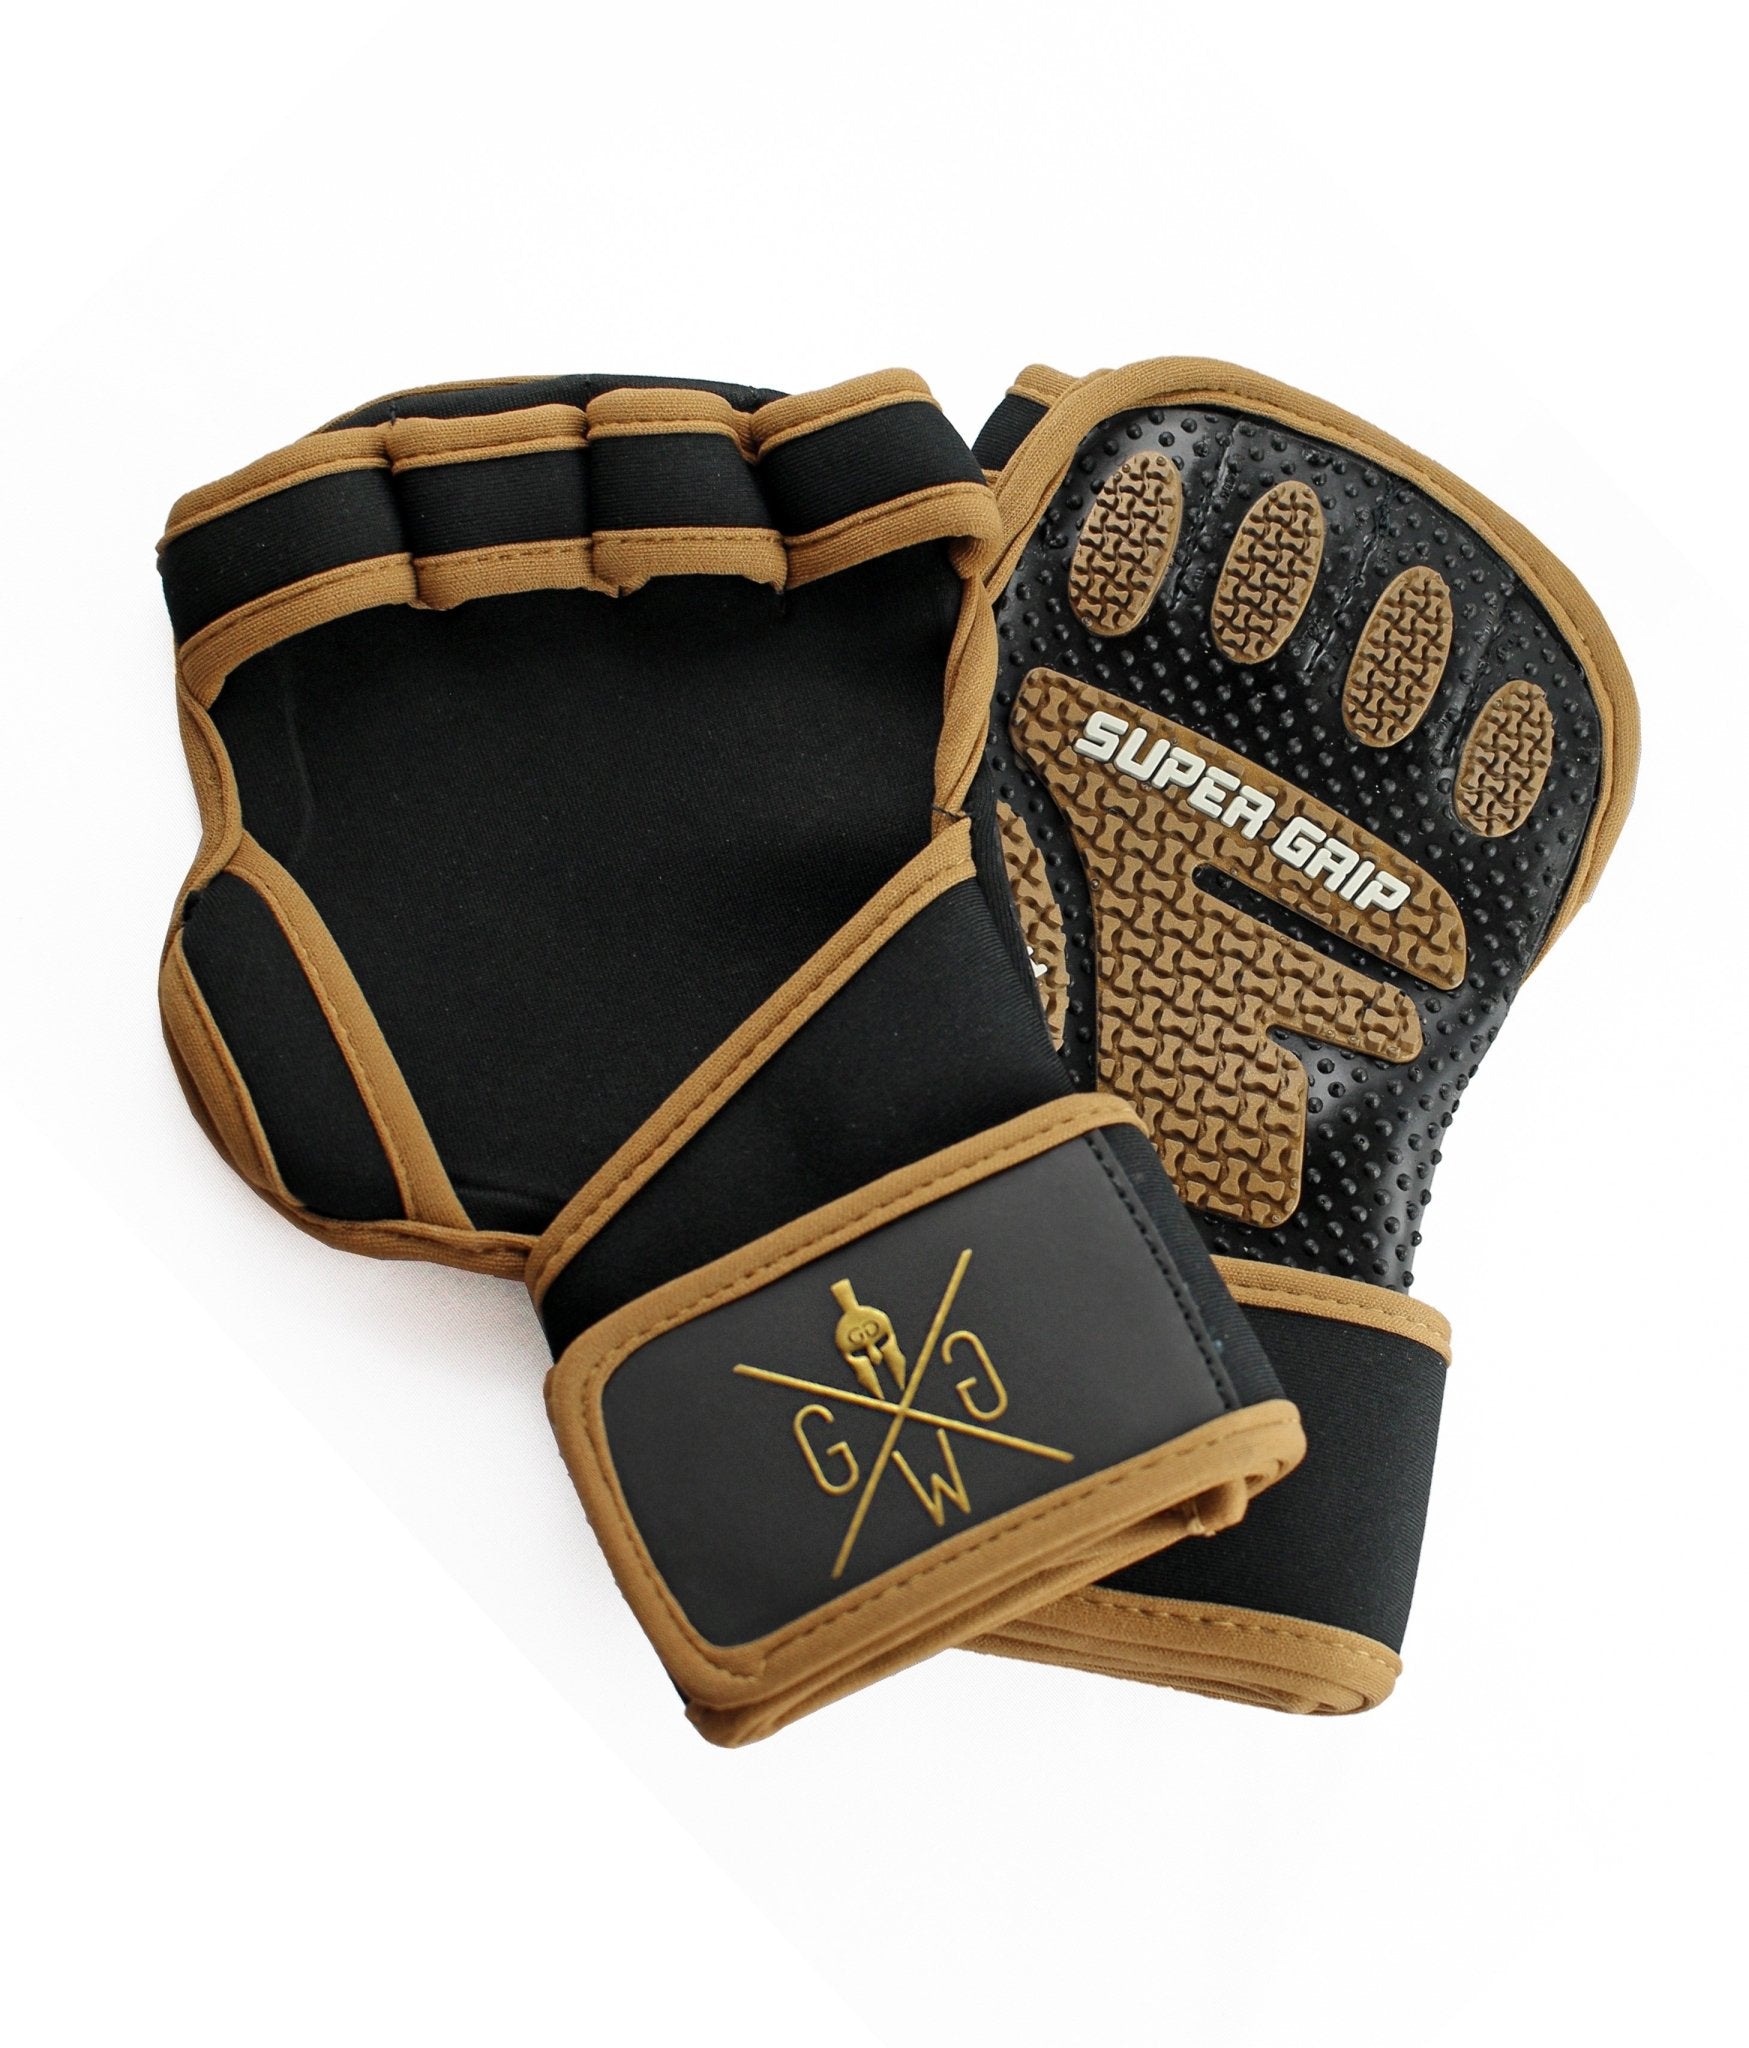 Professional fitness gloves with bandages and super grip – Gym